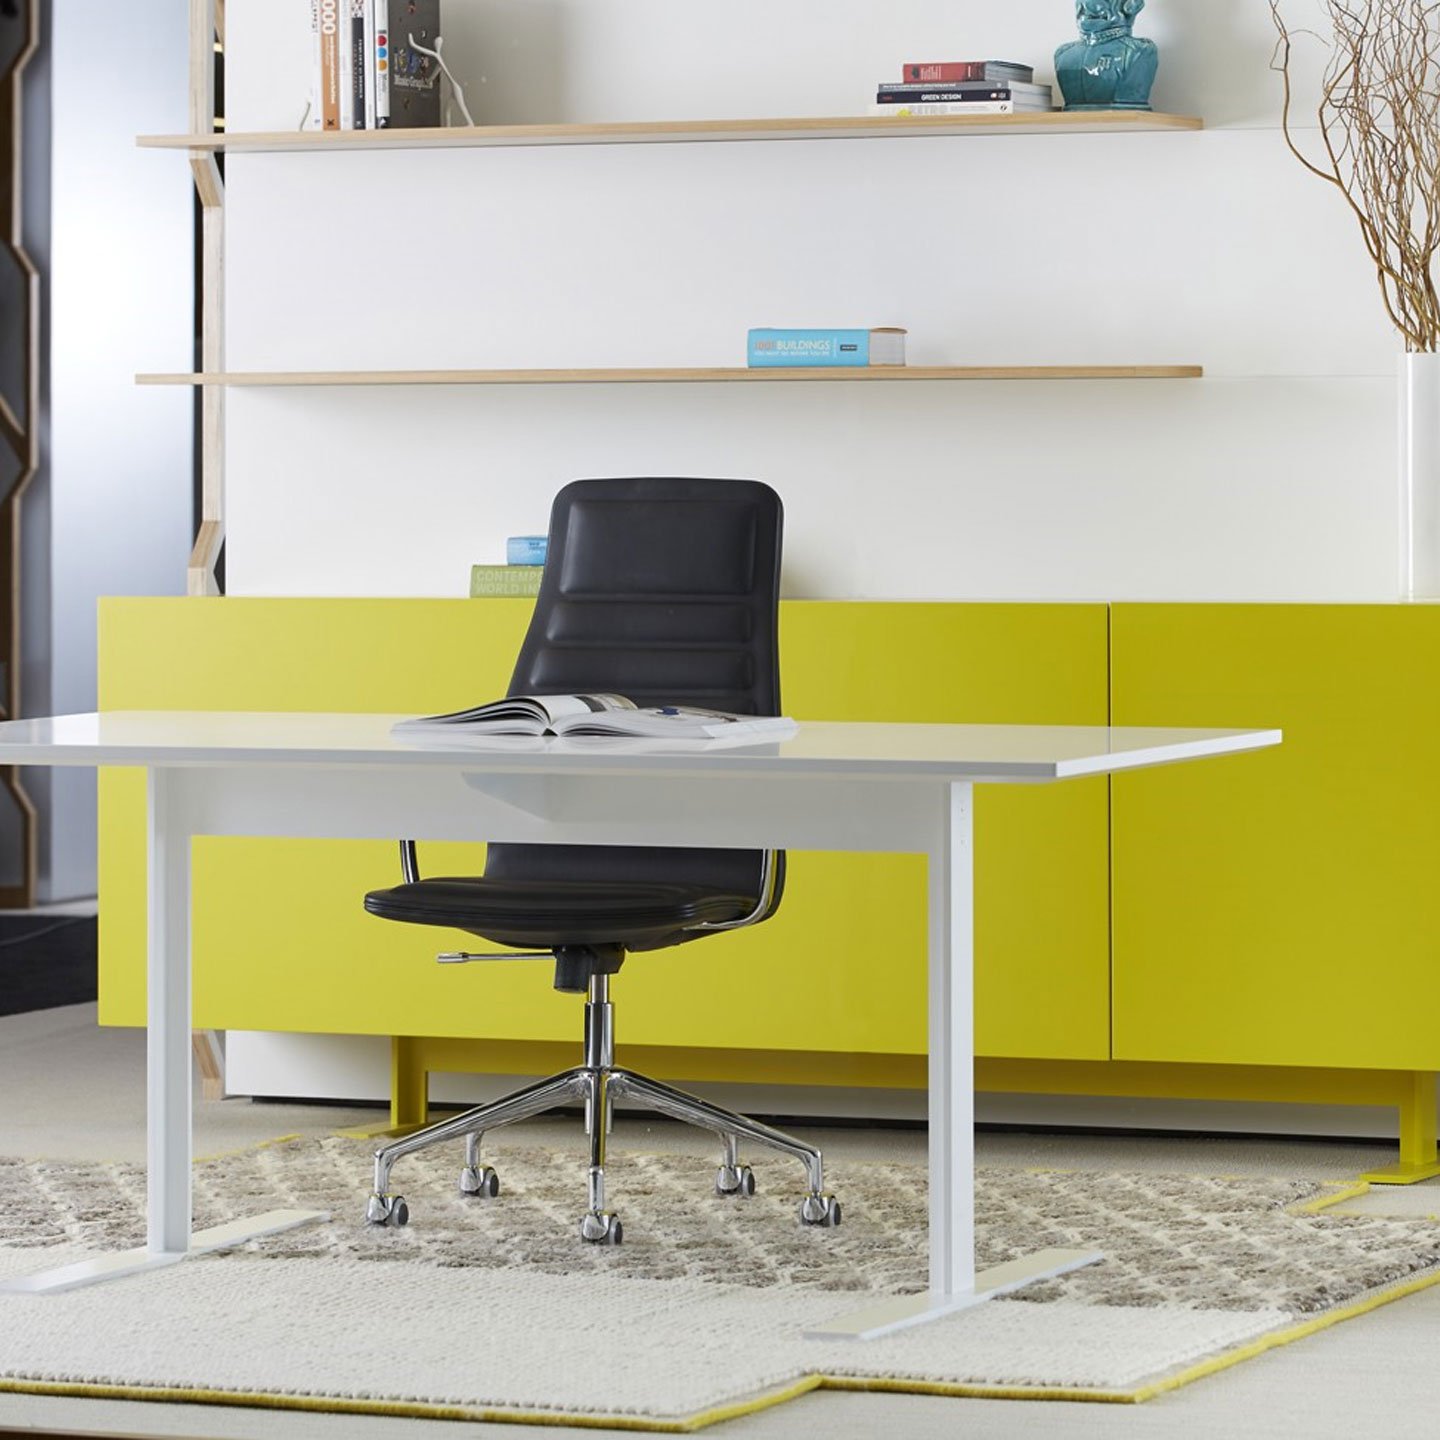 Luxor Credenza in yellow in private office with Lotus Executive. 